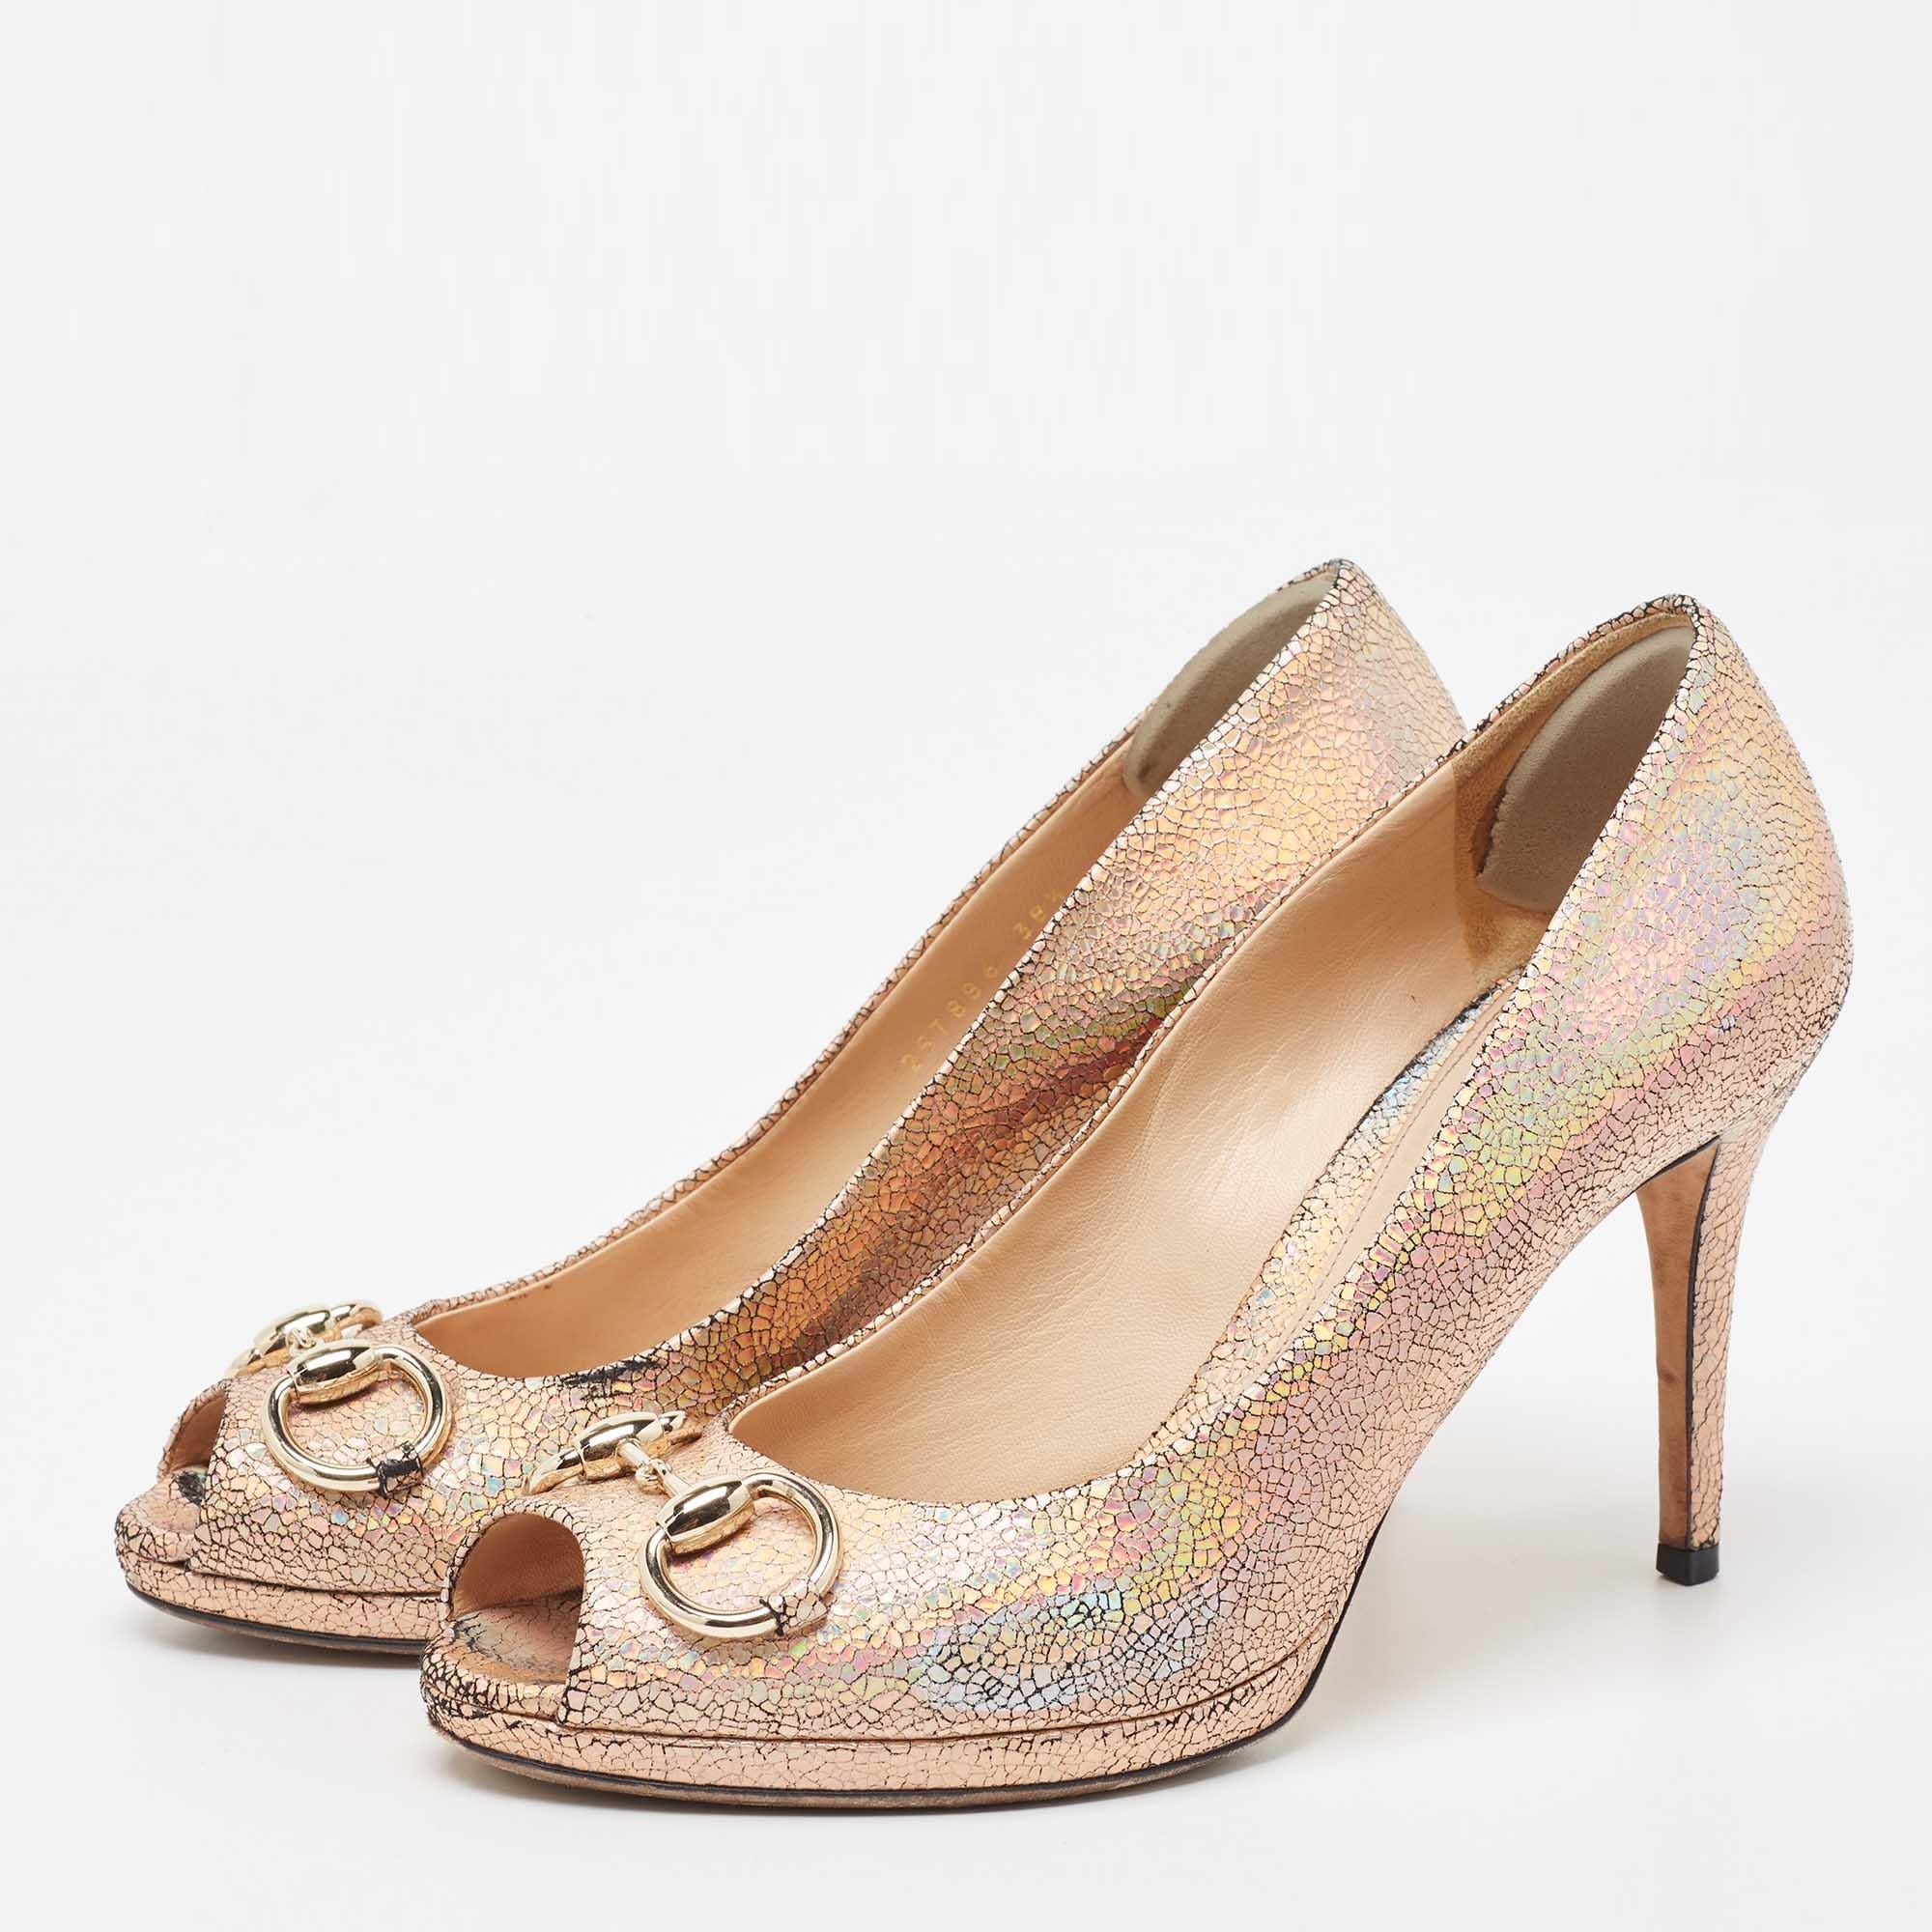 Gucci Metallic Pink Laminated Suede New Hollywood Platform Pumps Size 38.5 In Good Condition For Sale In Dubai, Al Qouz 2